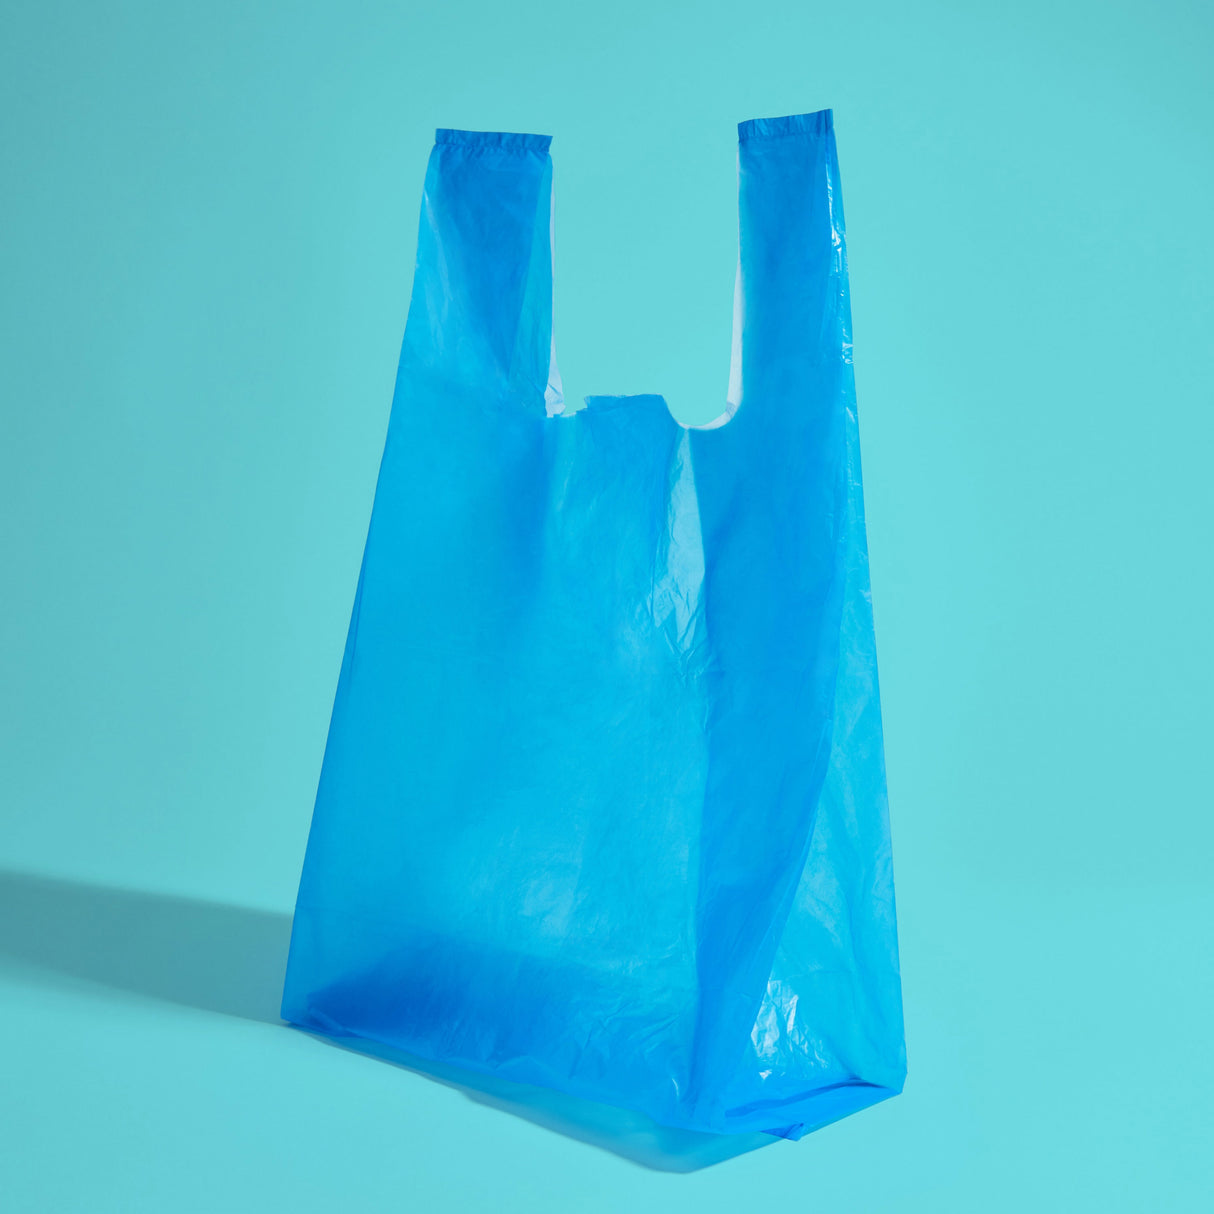 A blue disposable bag with handles that can tie together 